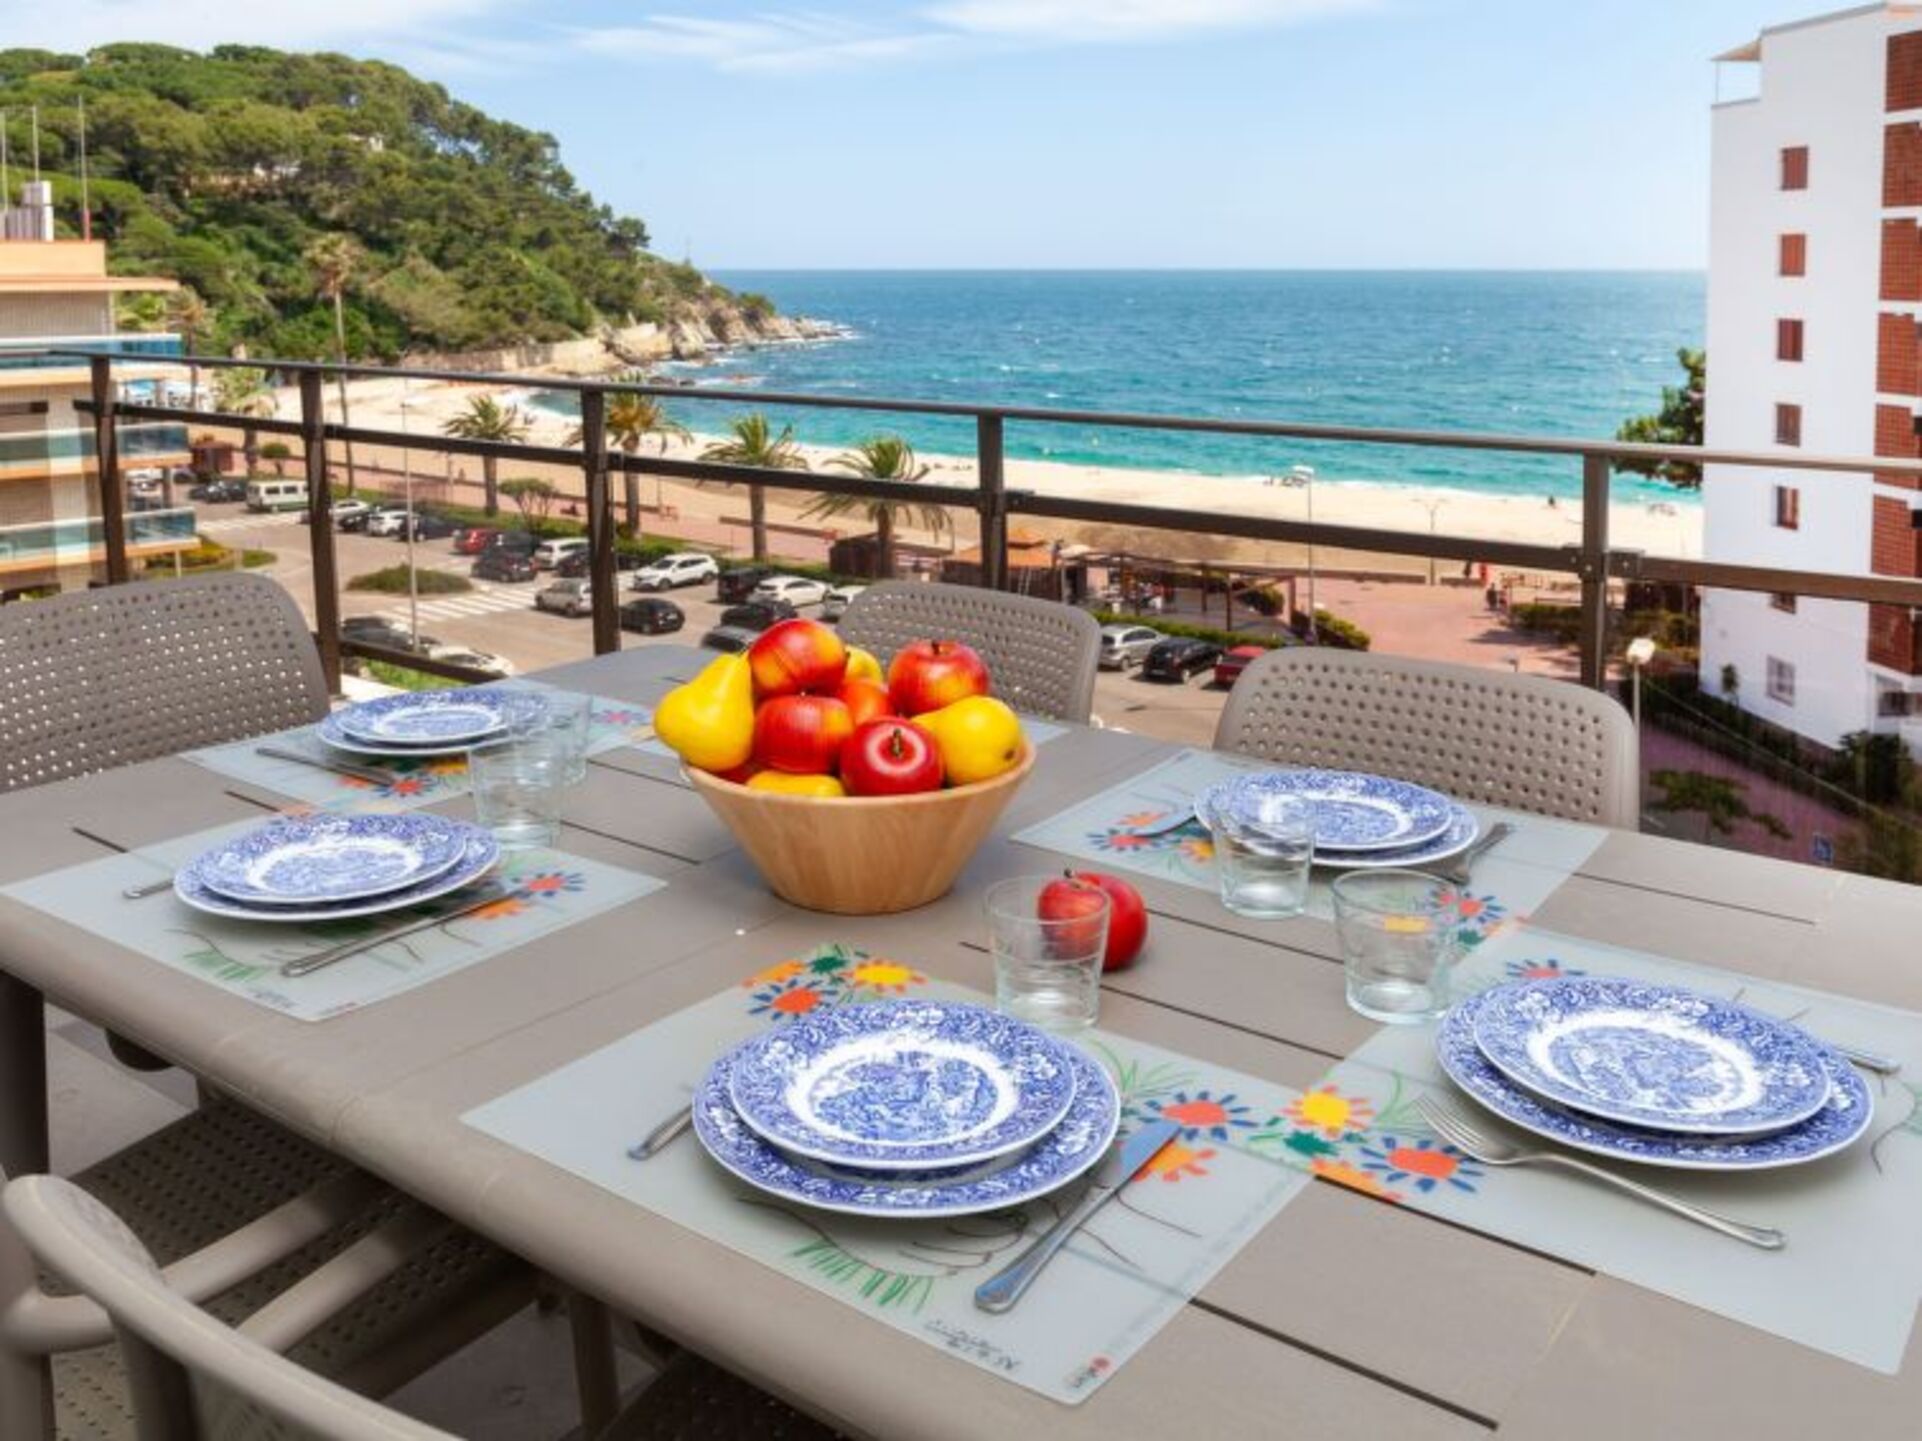 Property Image 1 - Property Manager Villa with First Class Amenities, Costa Brava Apartment 1034